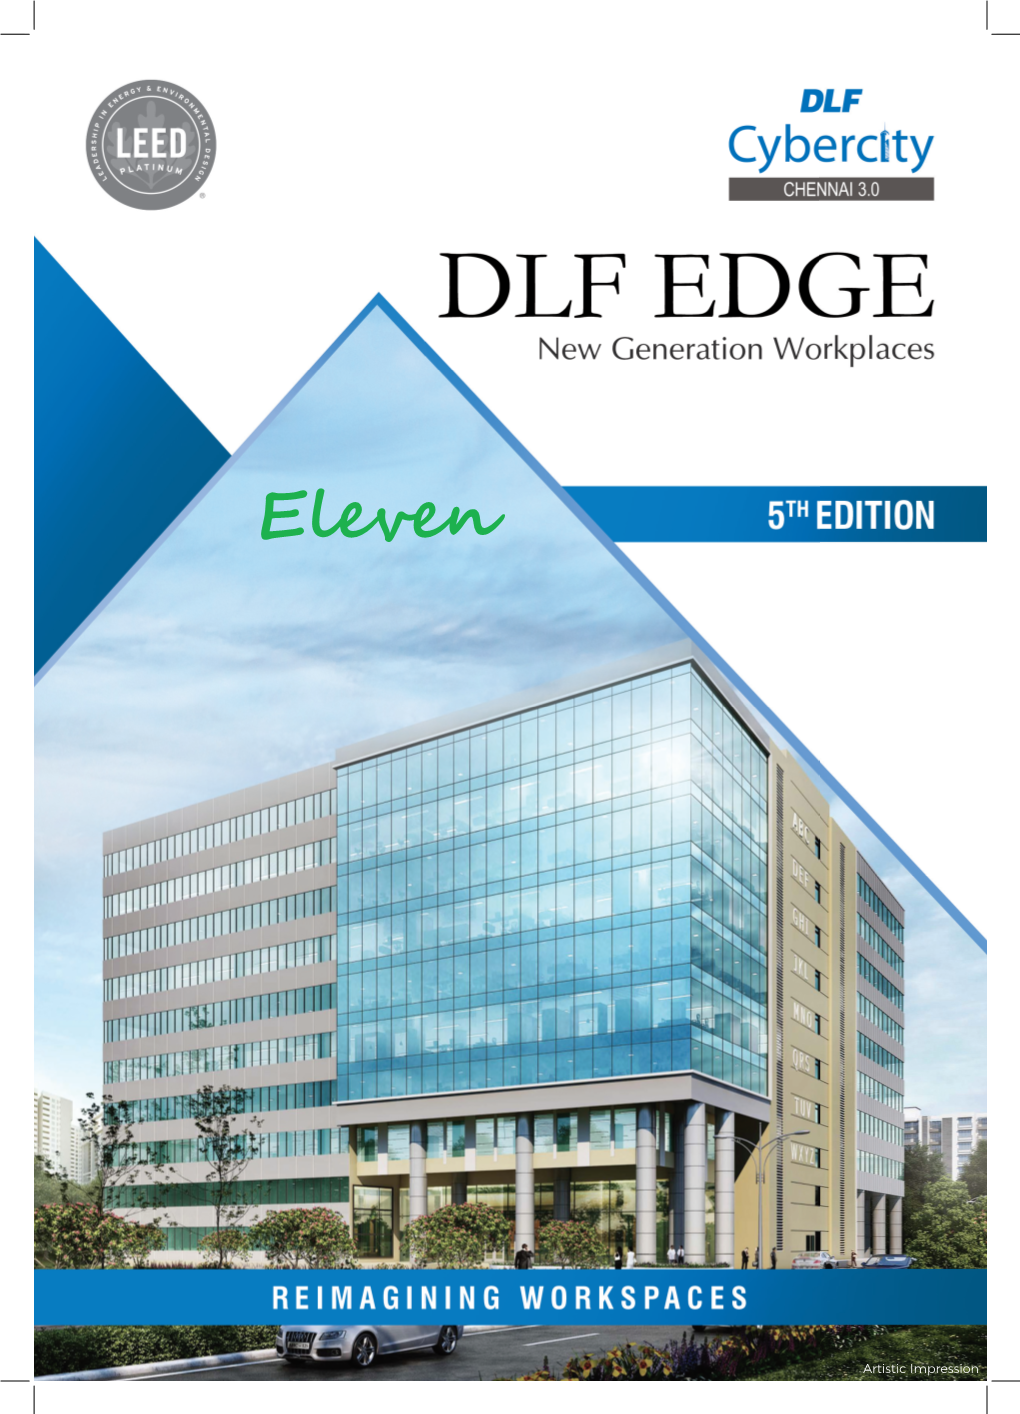 Dlf Cybercity, Chennai the Most Awaited Office Space